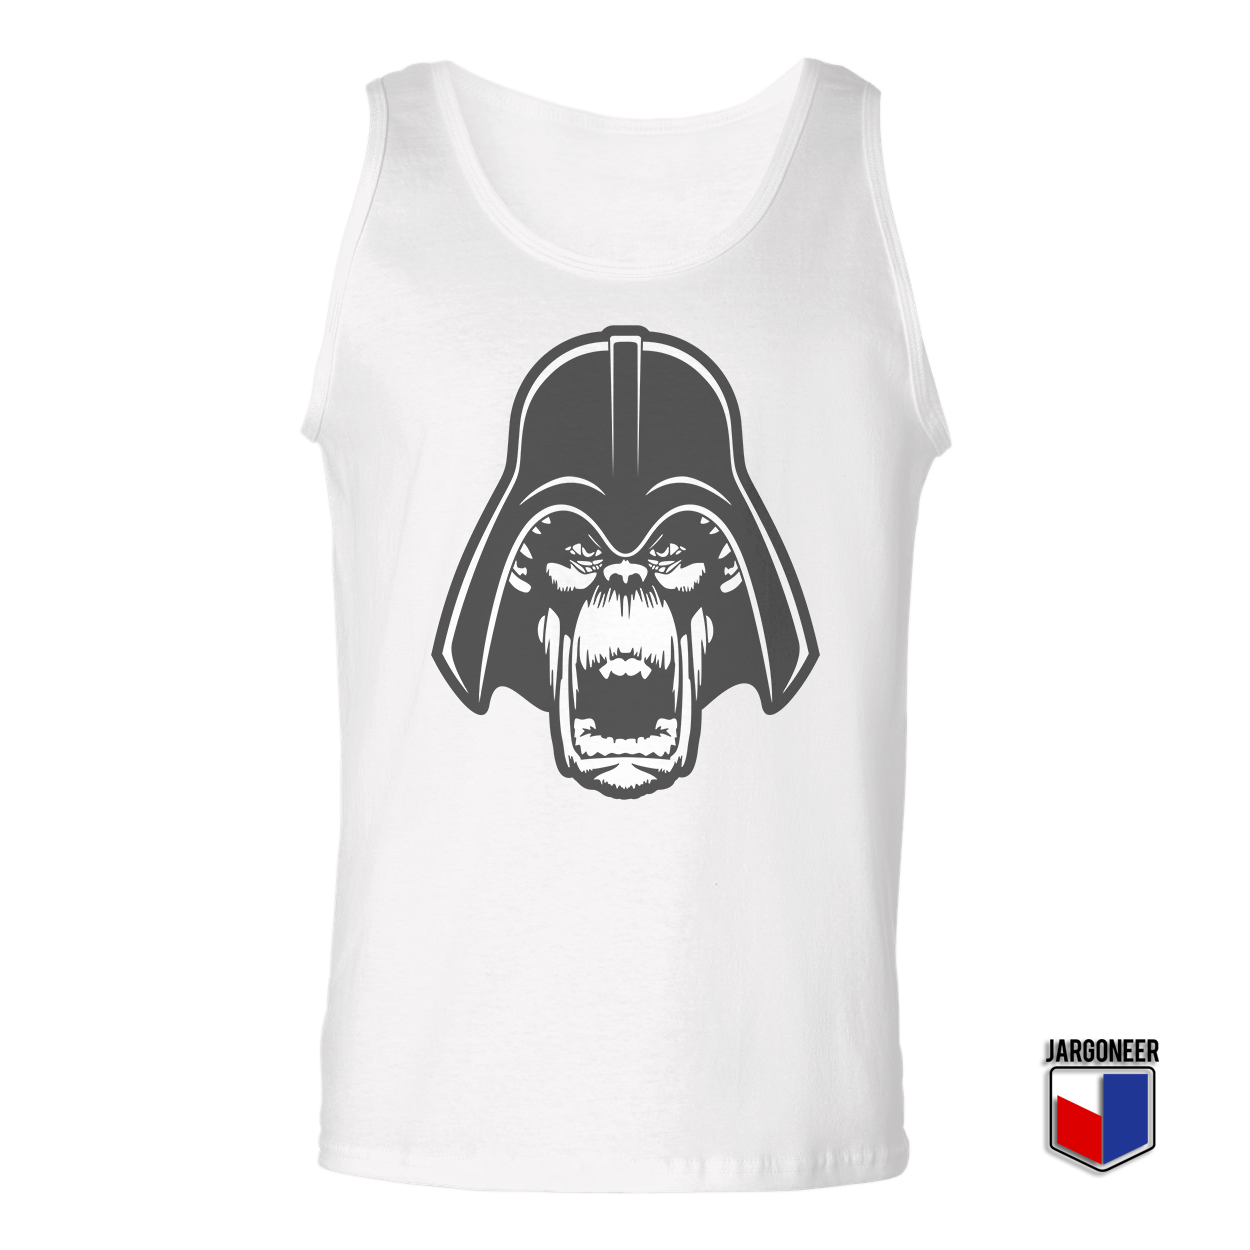 Monkey Of The Galaxy White Tank Top - Shop Unique Graphic Cool Shirt Designs